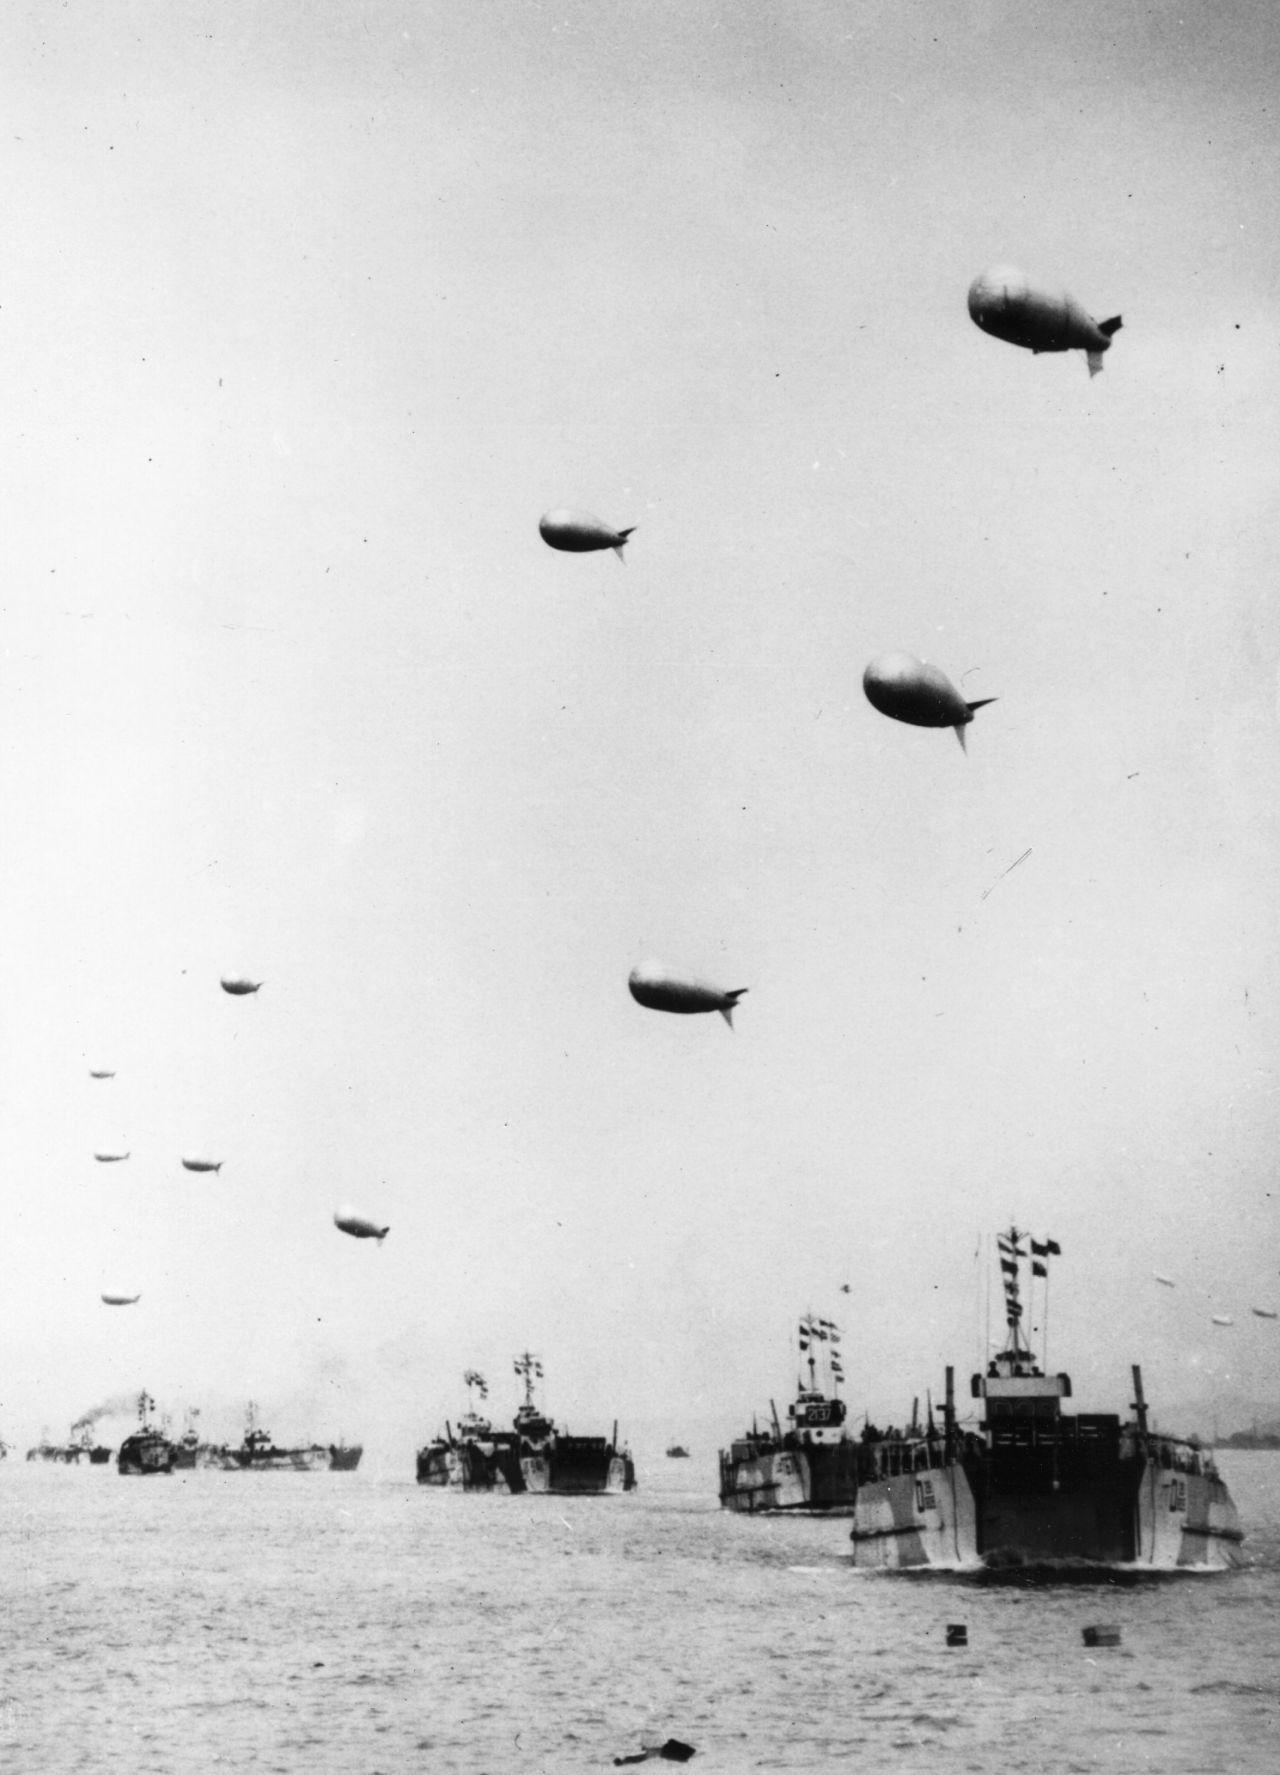 Tank landing ships, each towing a protective barrage balloon, leave the English coast carrying supplies to the French beachhead.